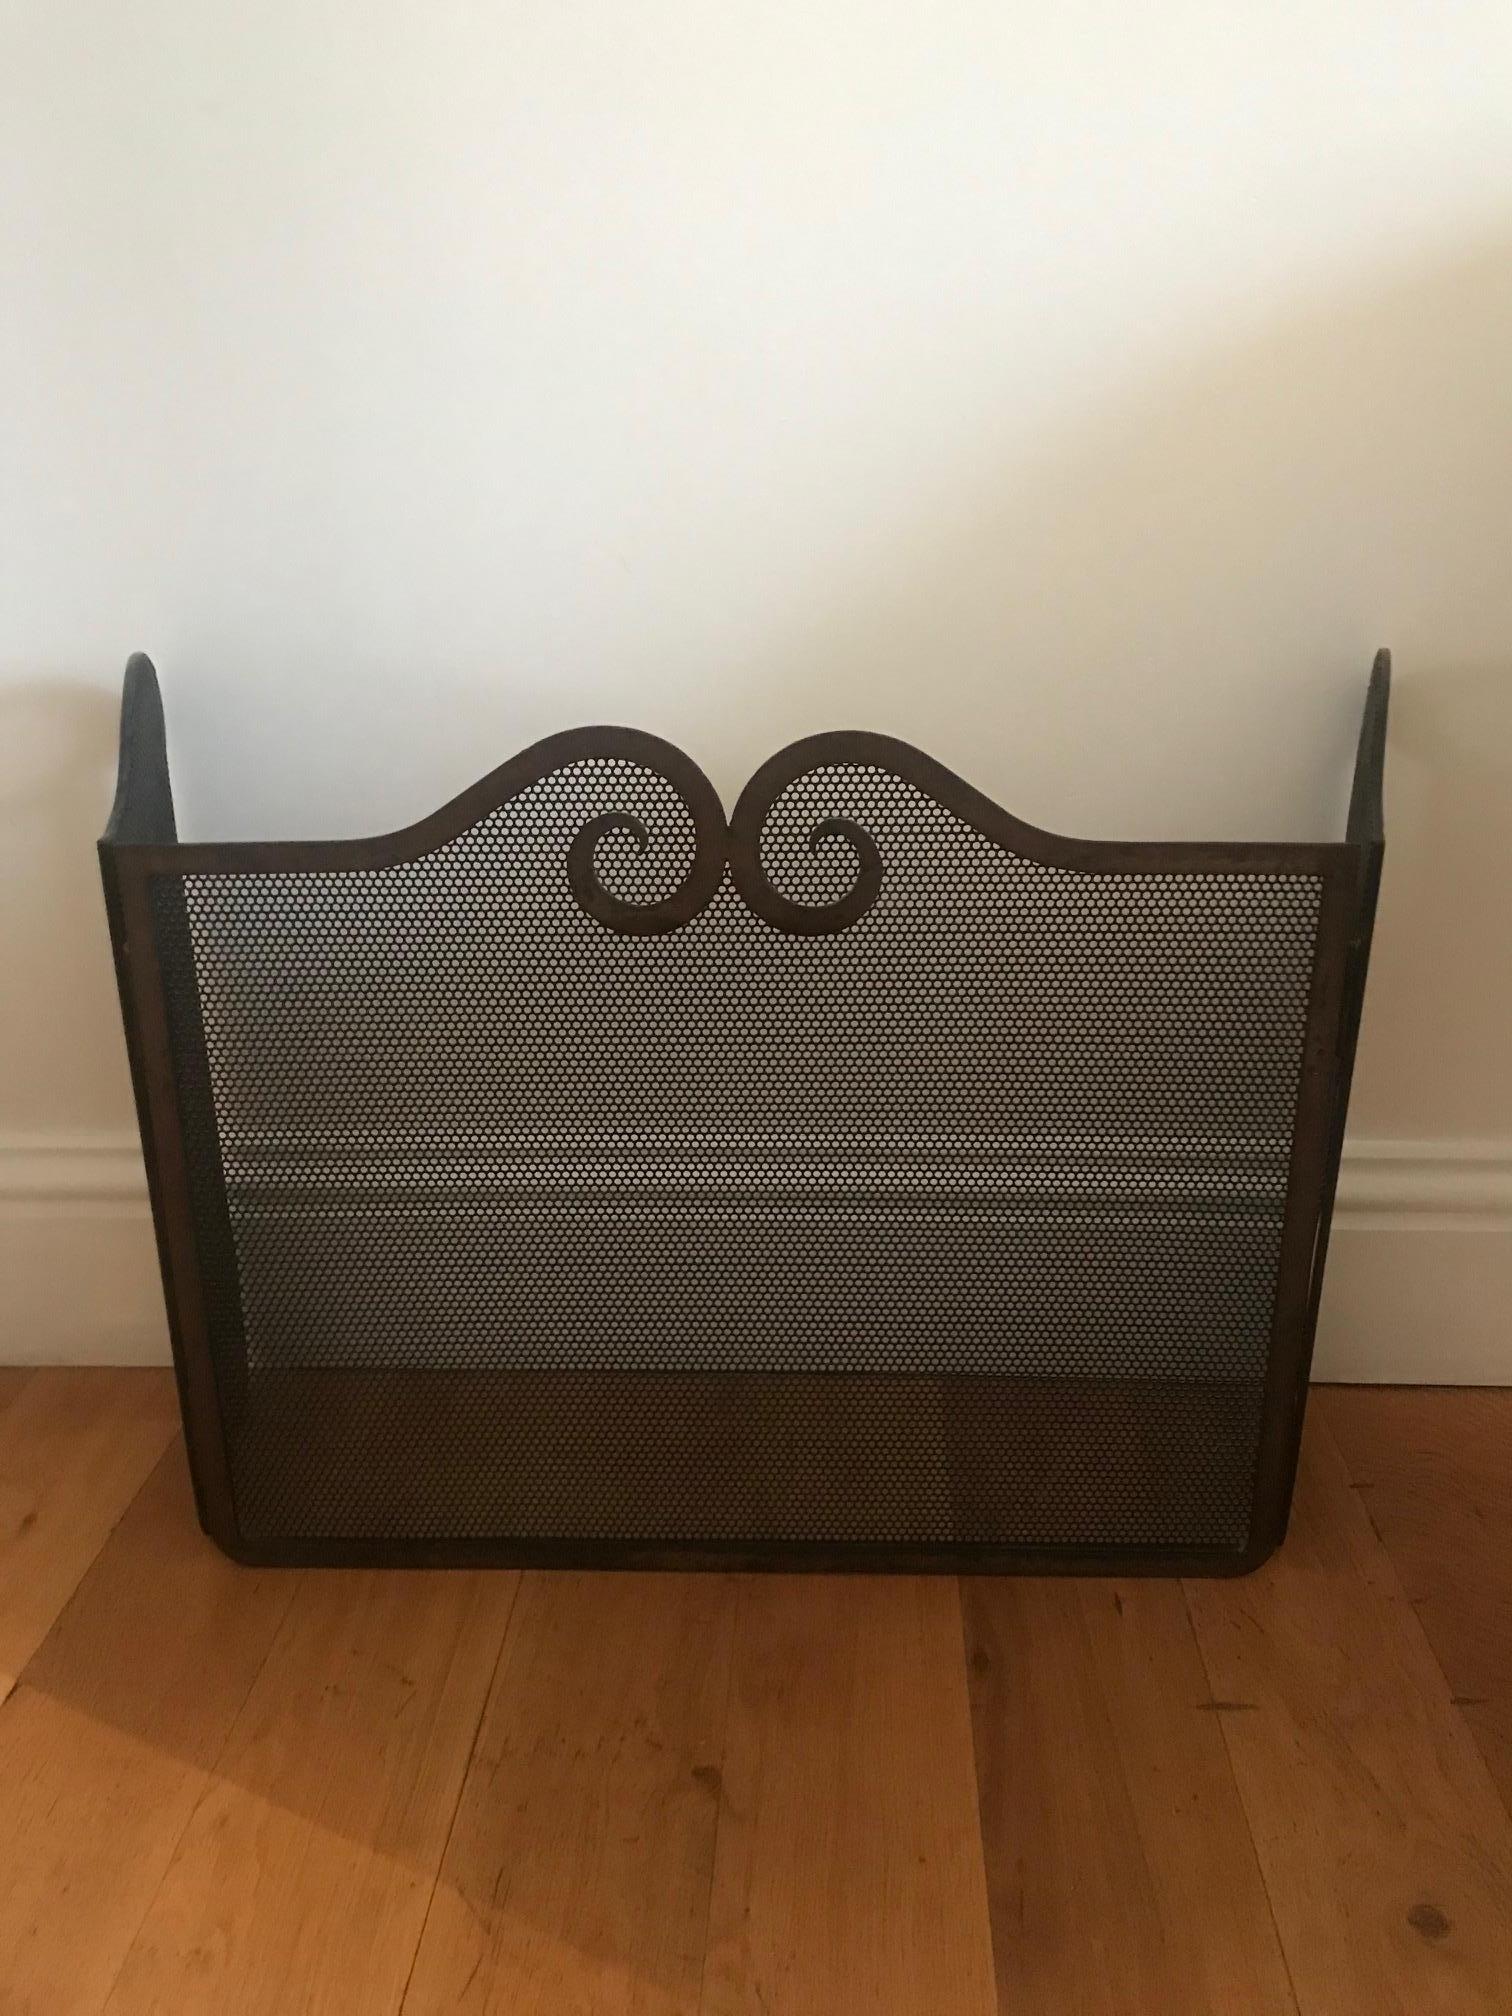 1940s French iron fire screen. Elegant and simple design, would complement most fireplaces.